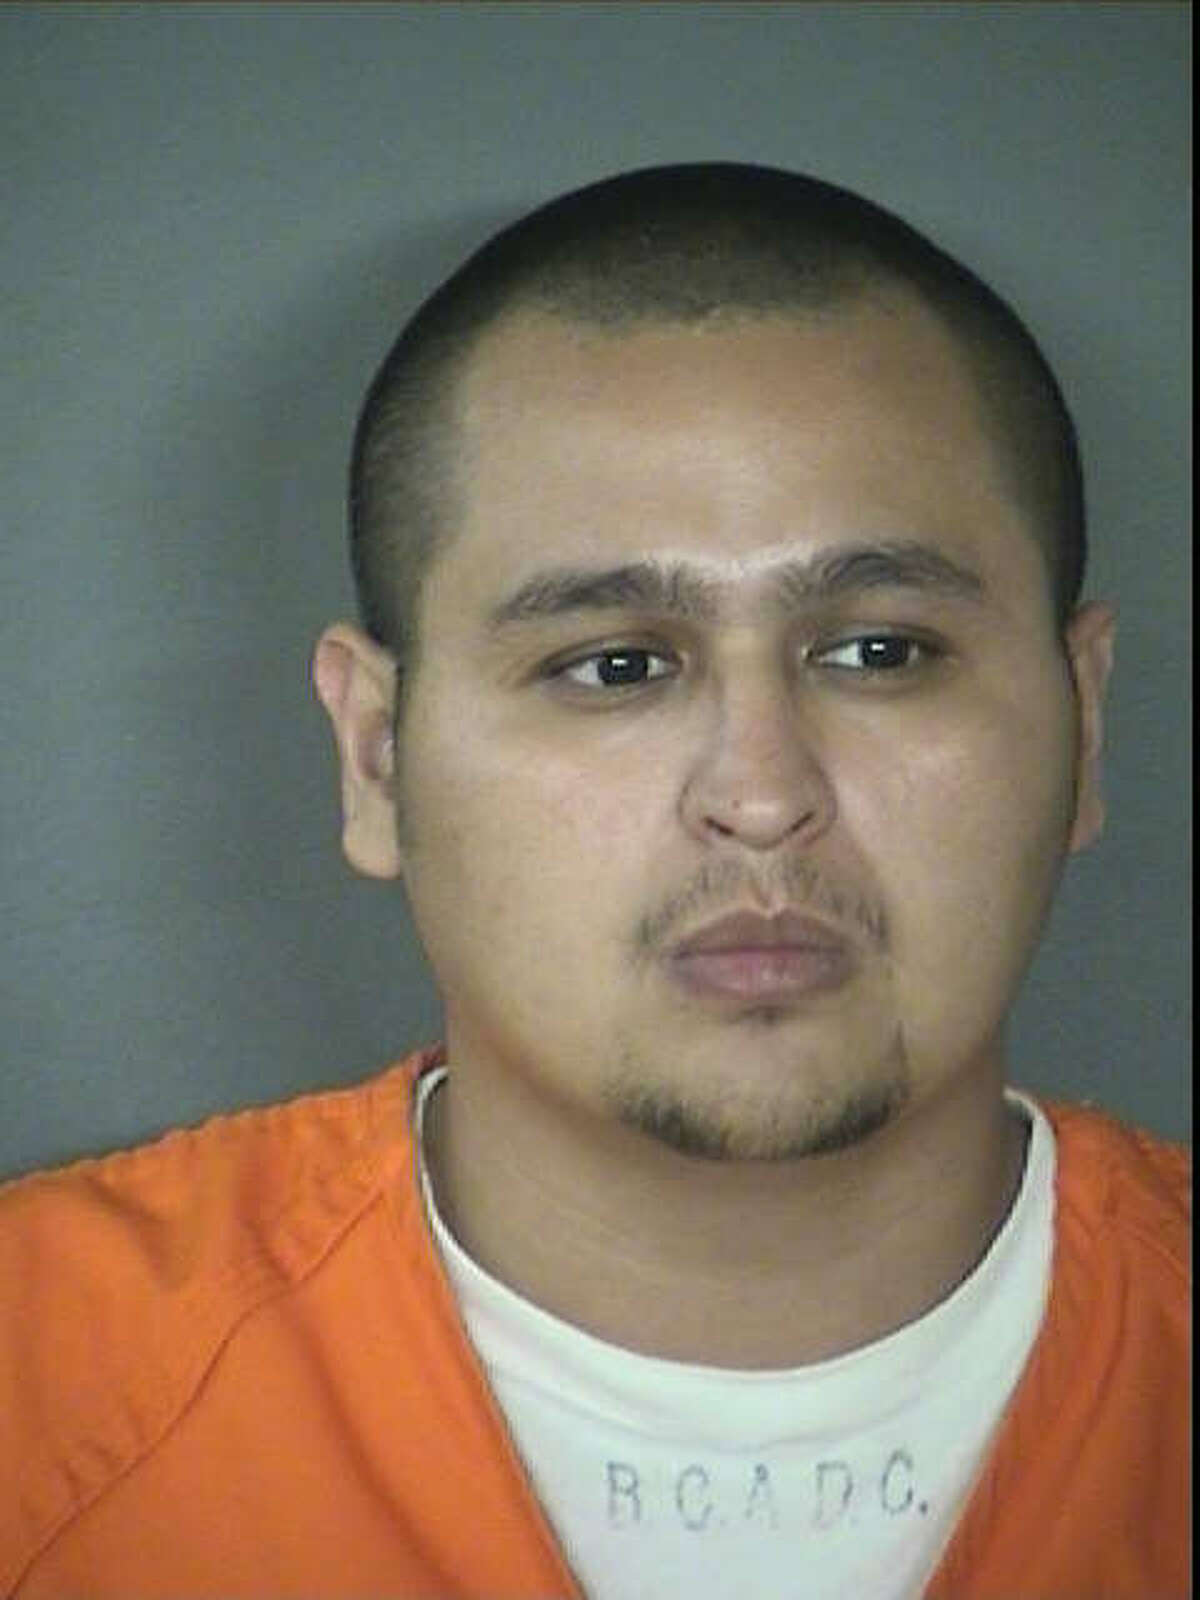 San Antonio police arrested Jorge Sandoval, 30, on Nov. 13, 2014, for allegedly assaulting Erica Estrada, his wife of 2 years with whom he has a child, after finding a pack of cigarettes that did not have "enough," leading him to believe she was seeing another man, according to an arrest affidavit.